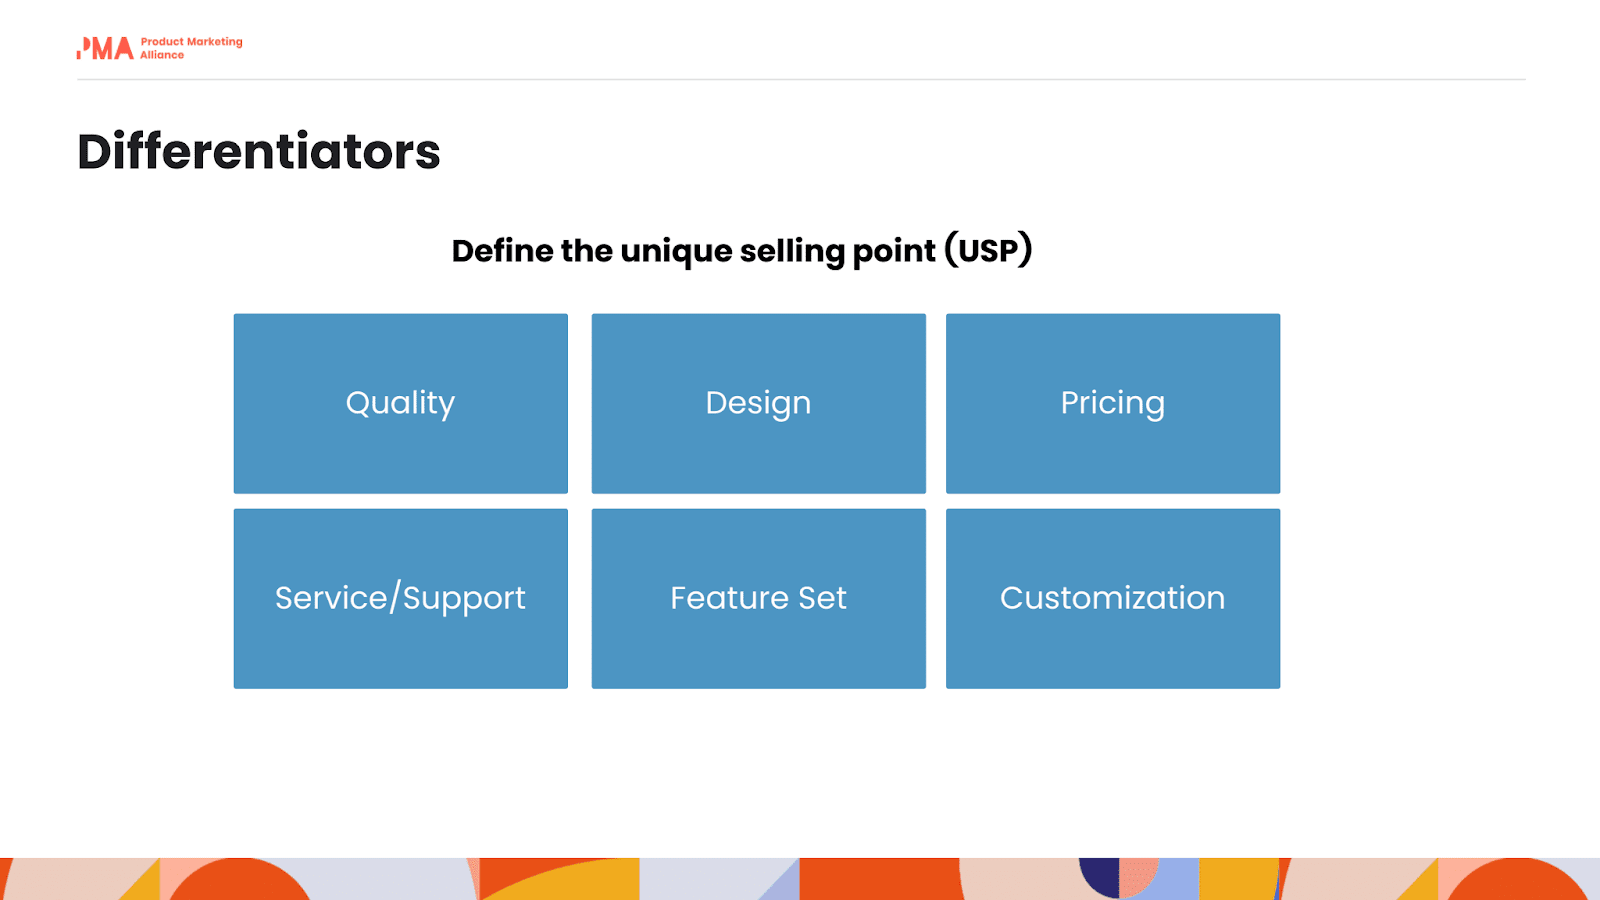 Possible USPs: Quality, design, pricing, service/support, feature set, customization